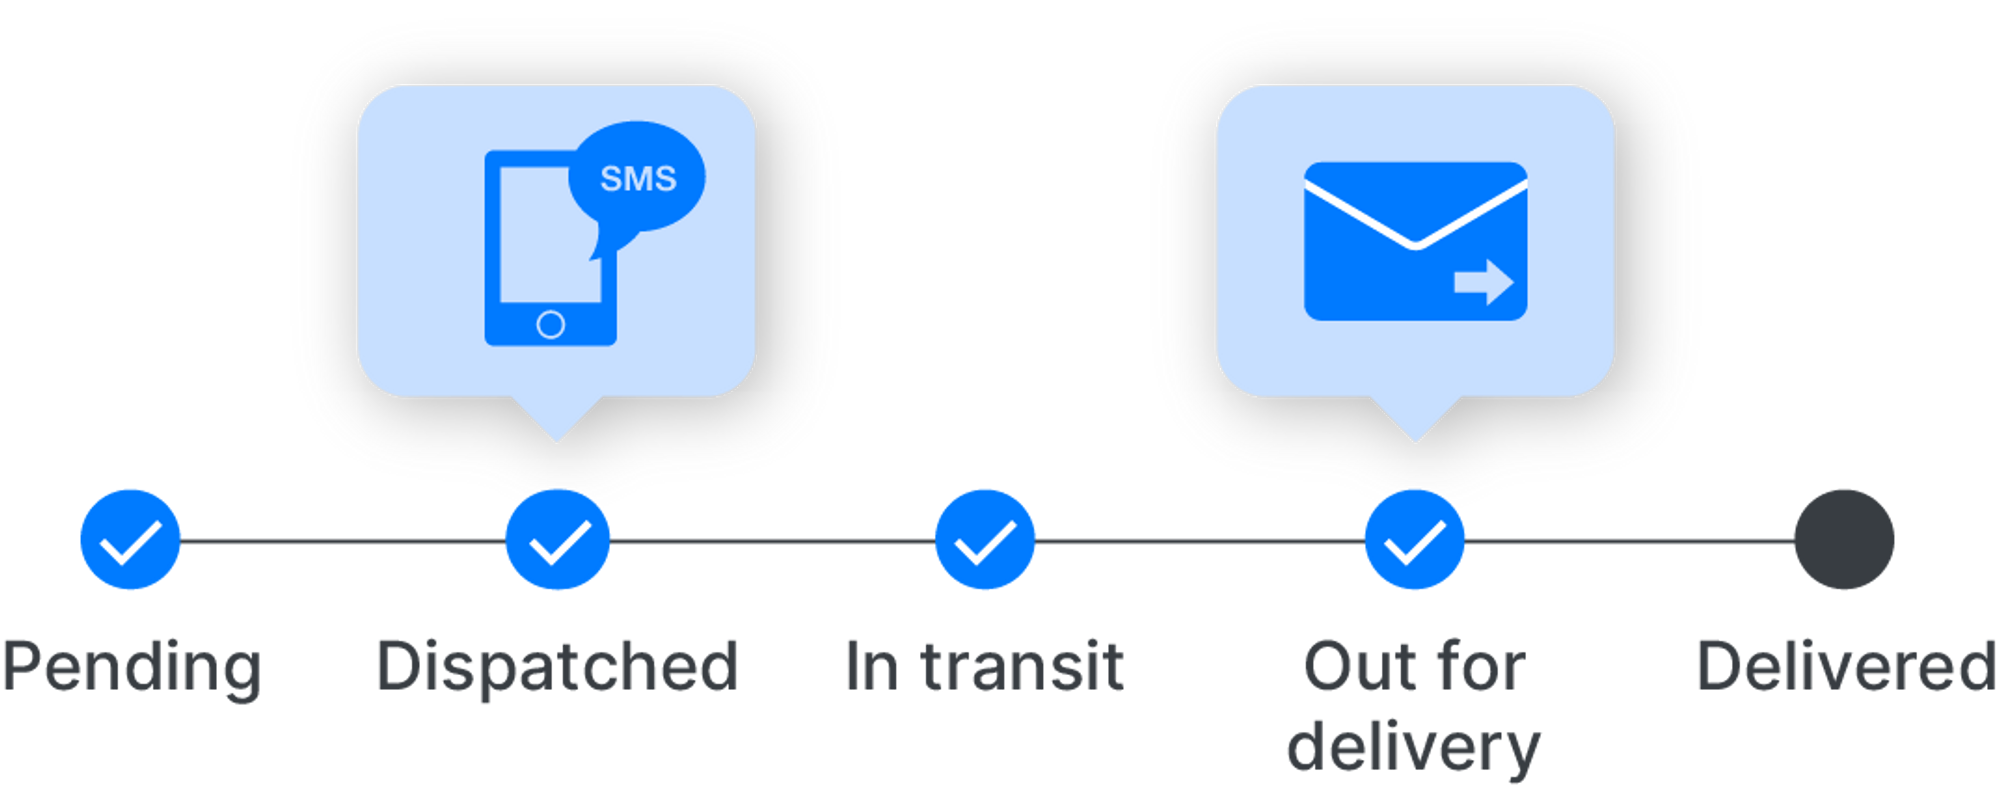 Delivery Stages with email and SMS notifications